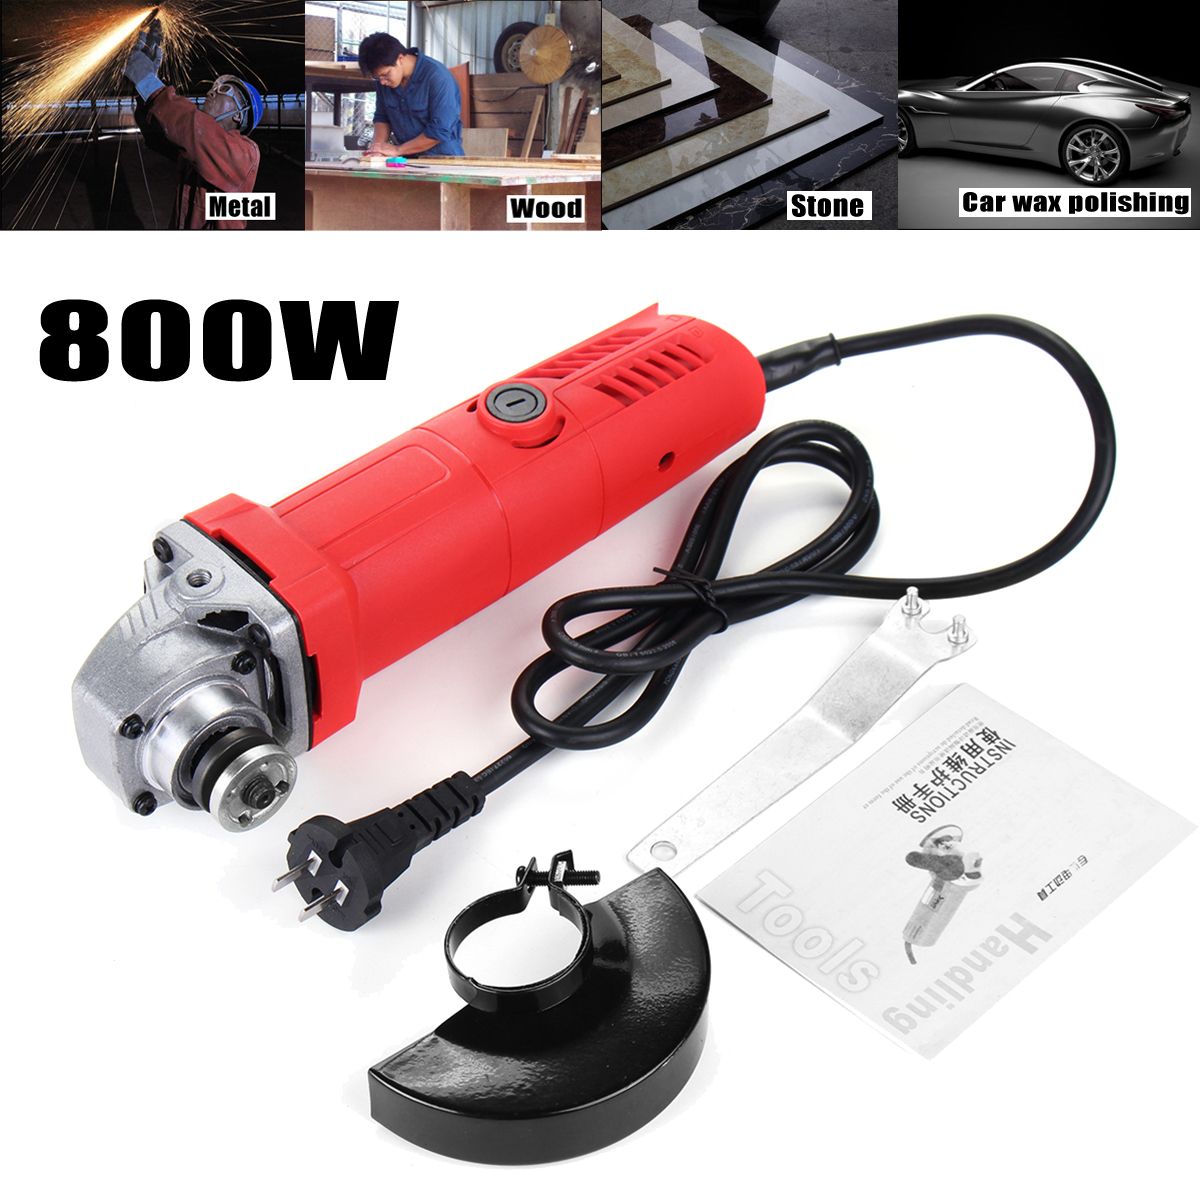 220V-800W-Multifunctional-Electric-Angle-Grinder-Power-Tools-1268477